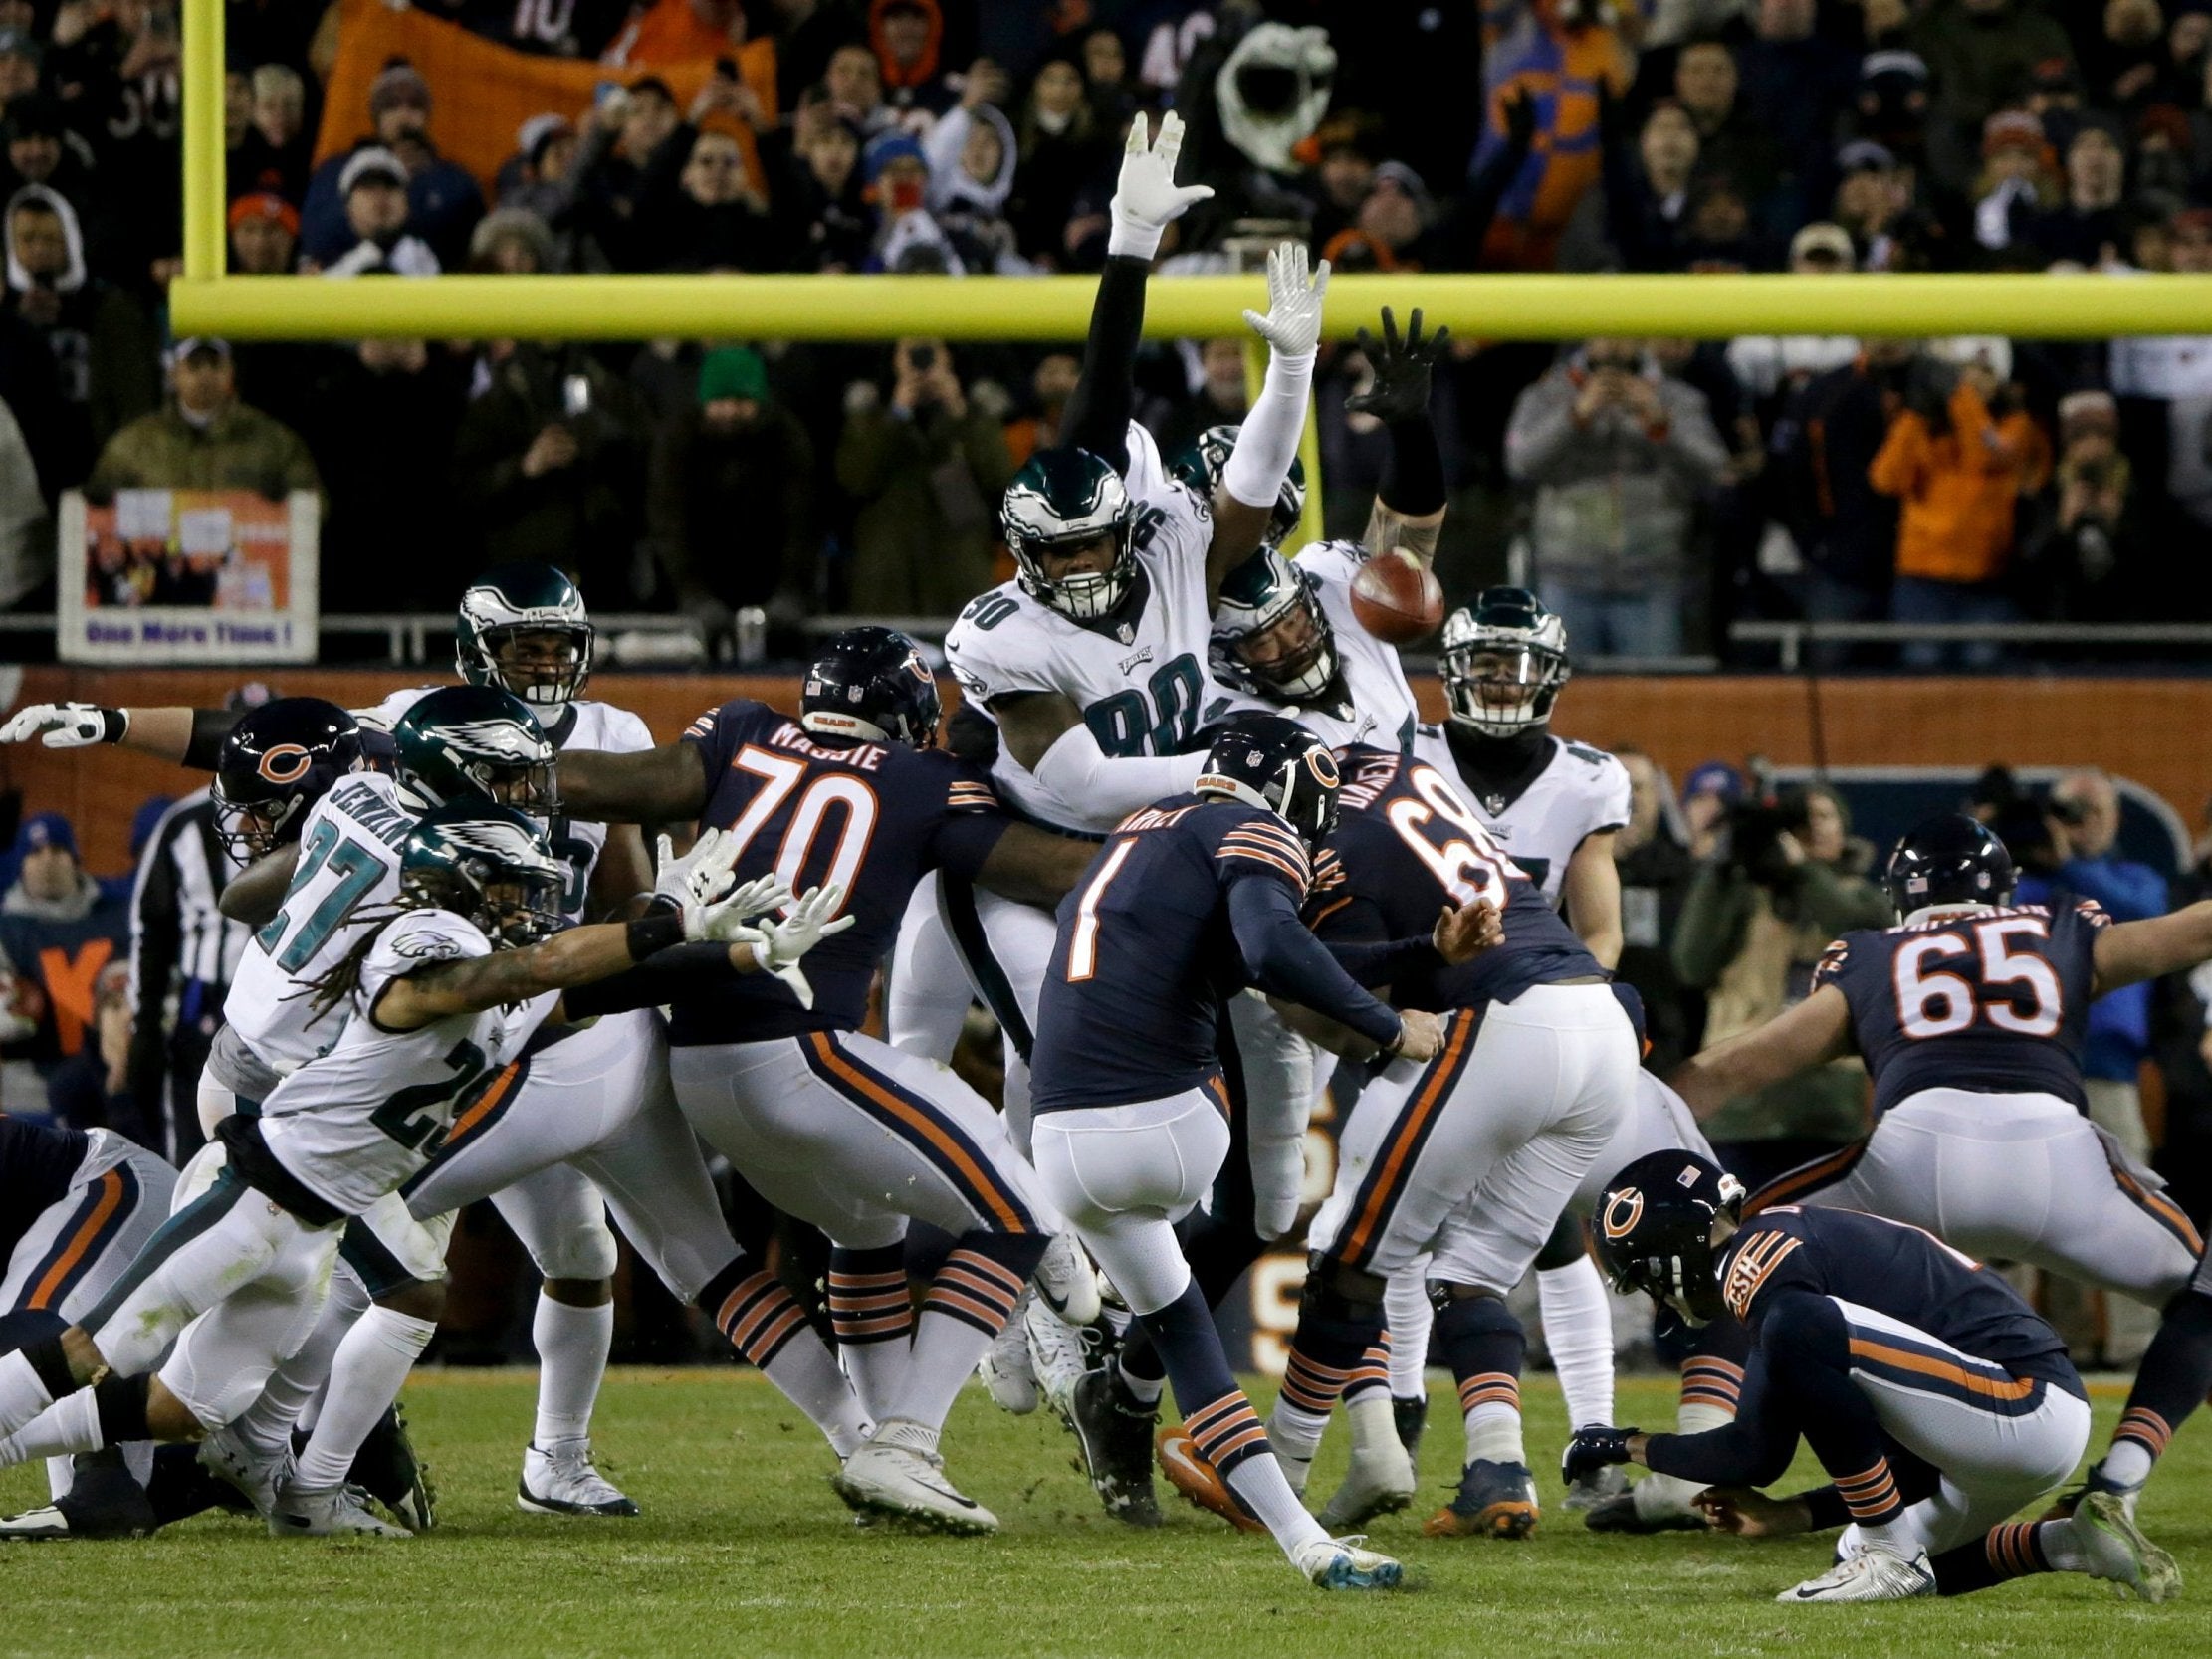 Parkey's missed field goal saw the Eagles advance